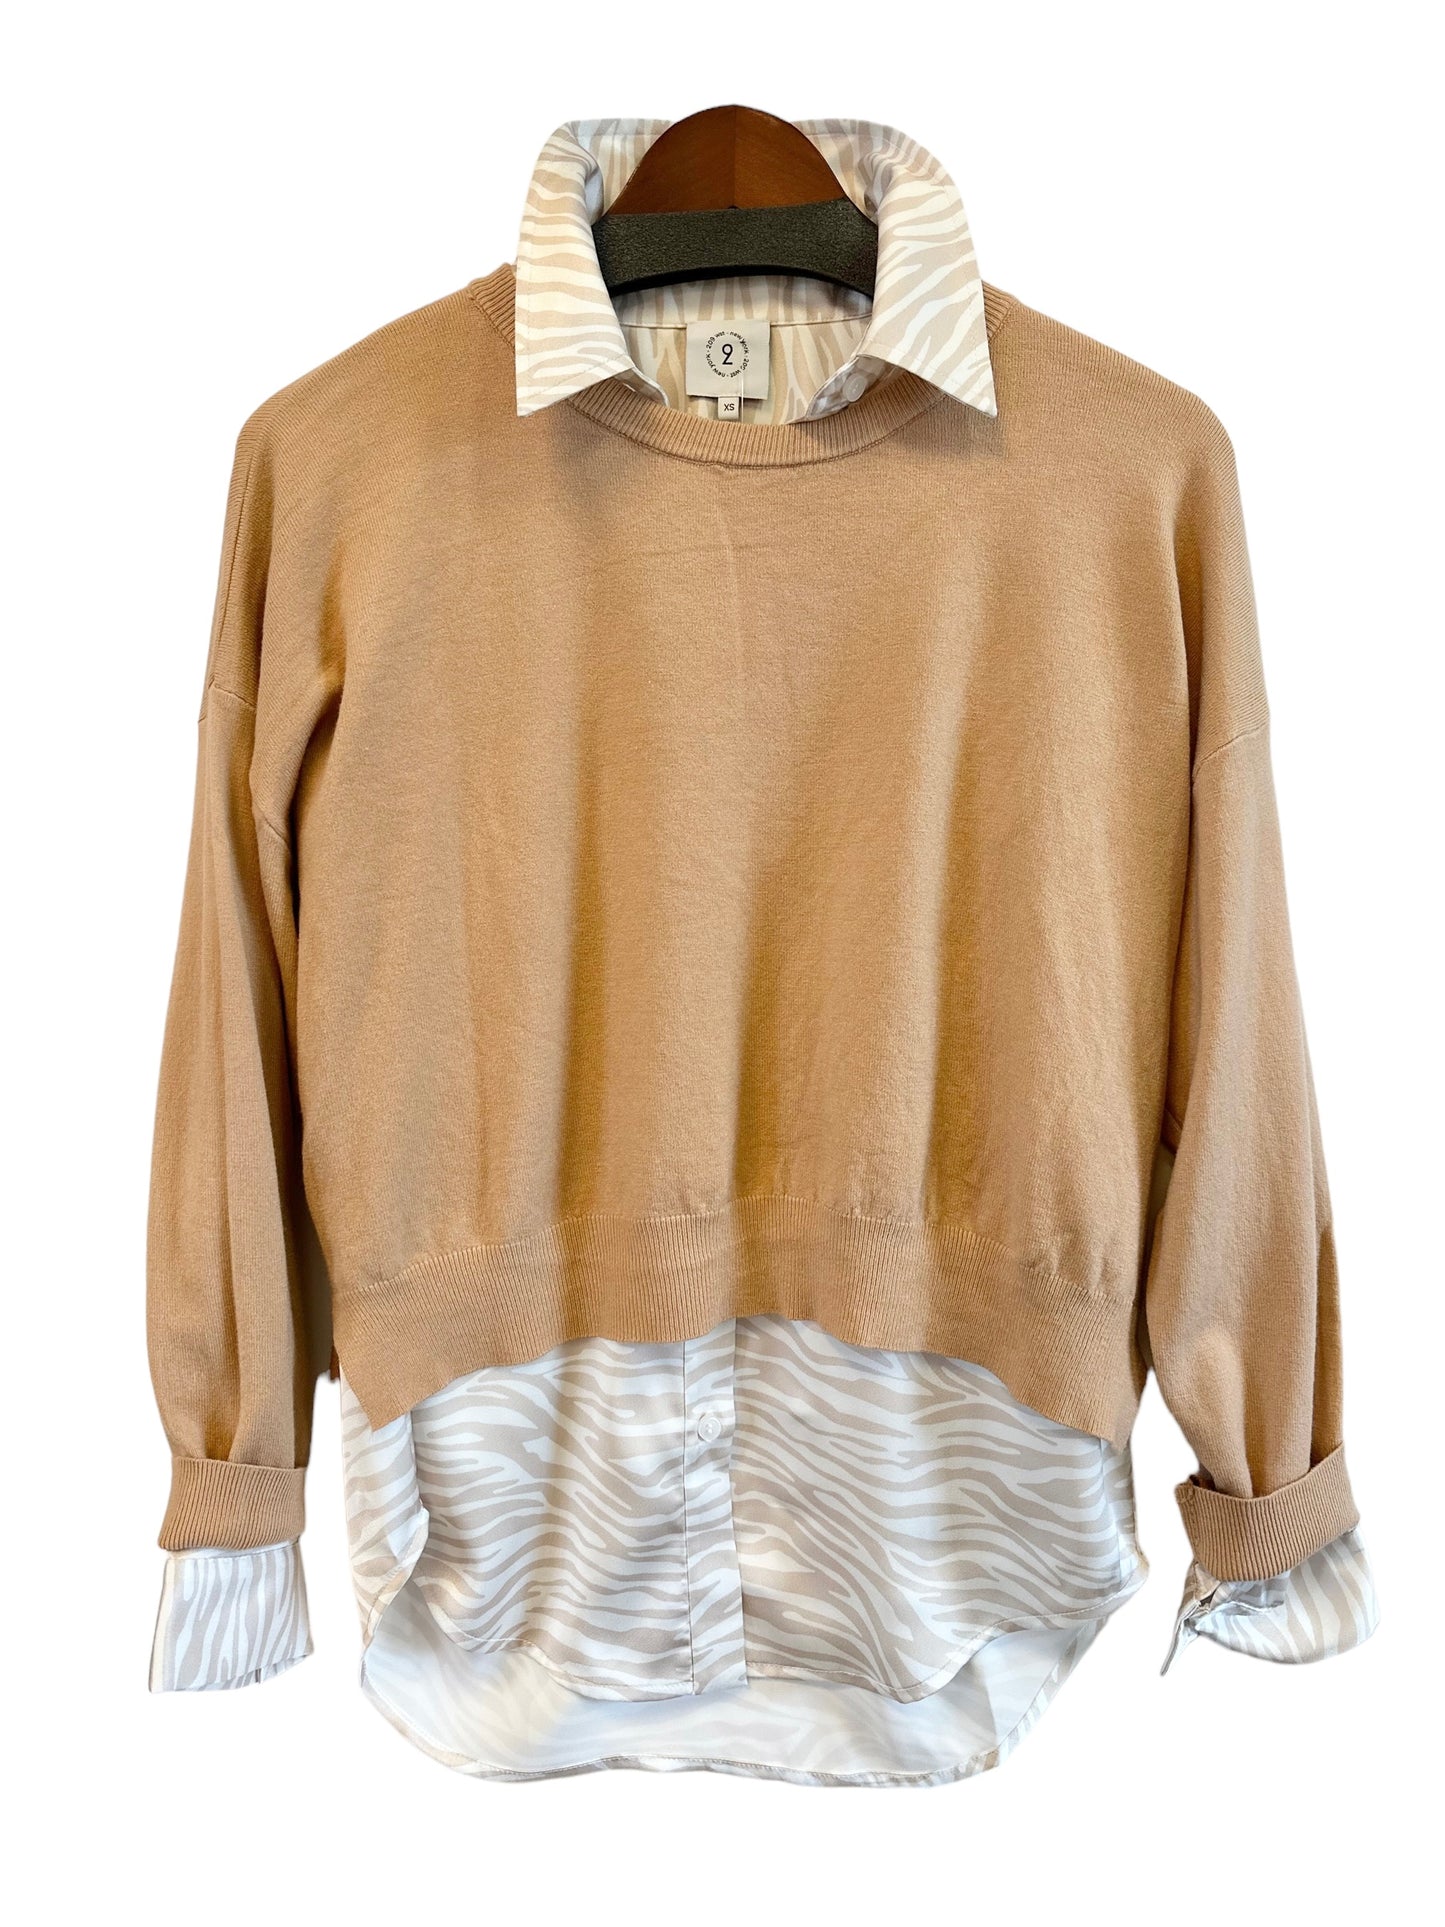 Zebra Print Button Up Blouse in champagne by 209